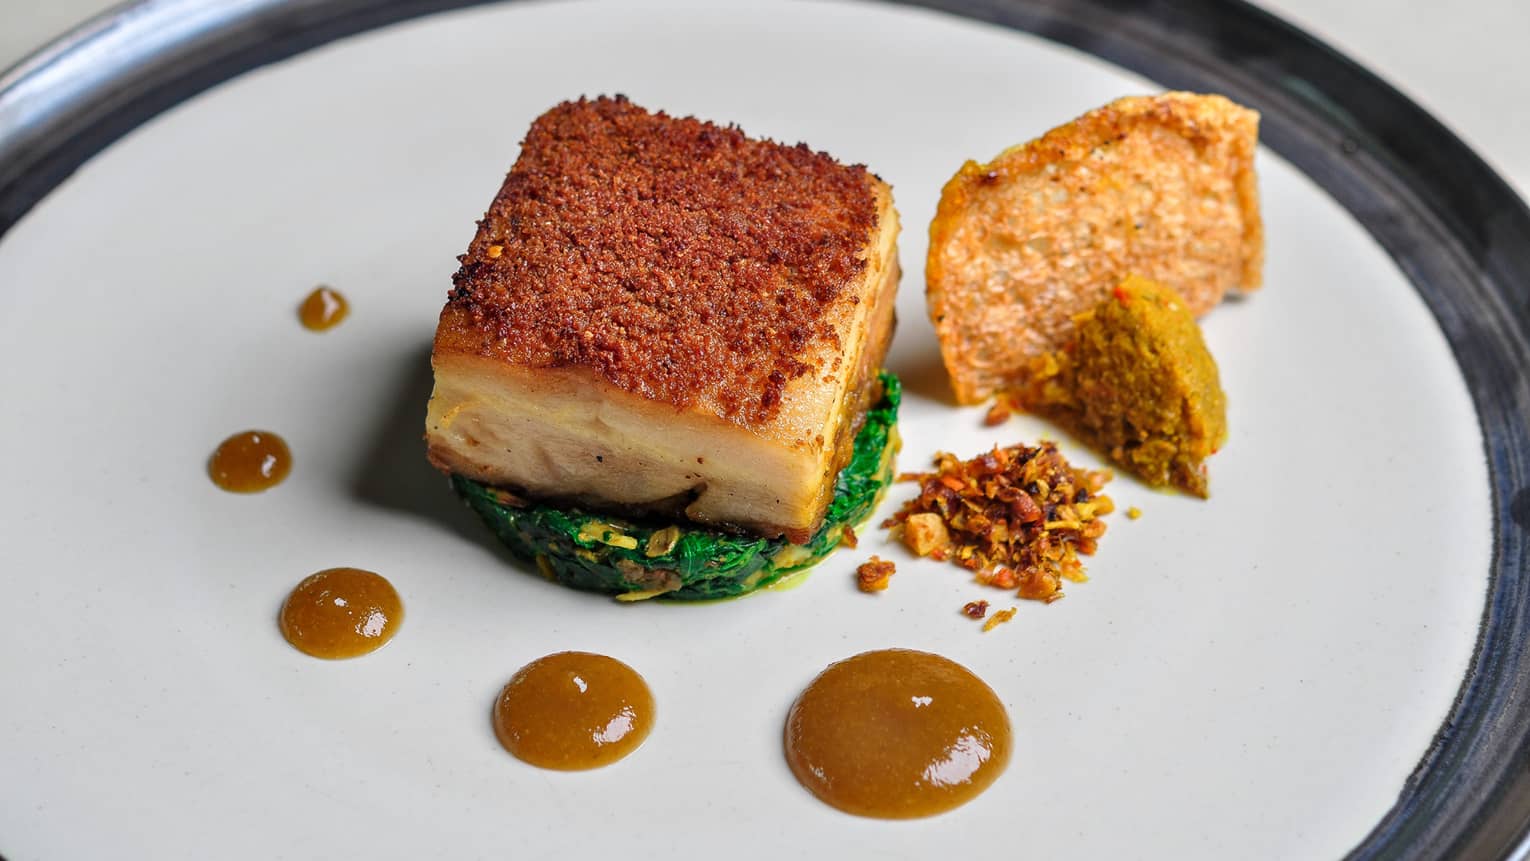 Babi Guling pork belly dish with crusted spice rub, sauteed pumpkin, dabs of orange sauce on white plate, 